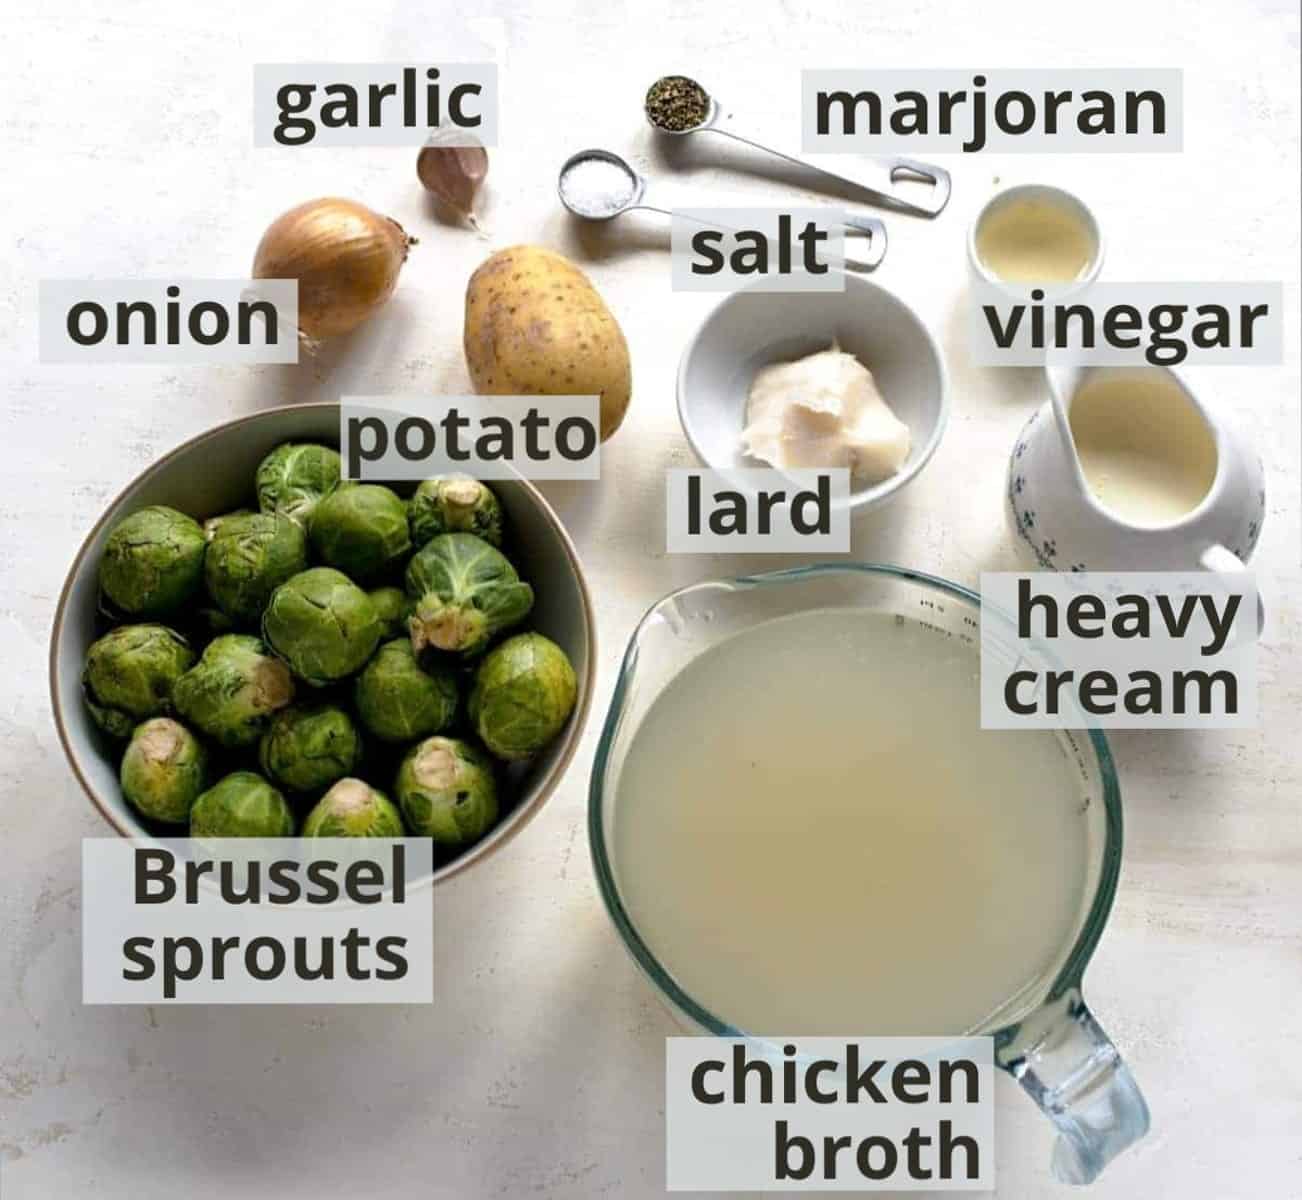 Ingredients for brussel sprouts with captions. 